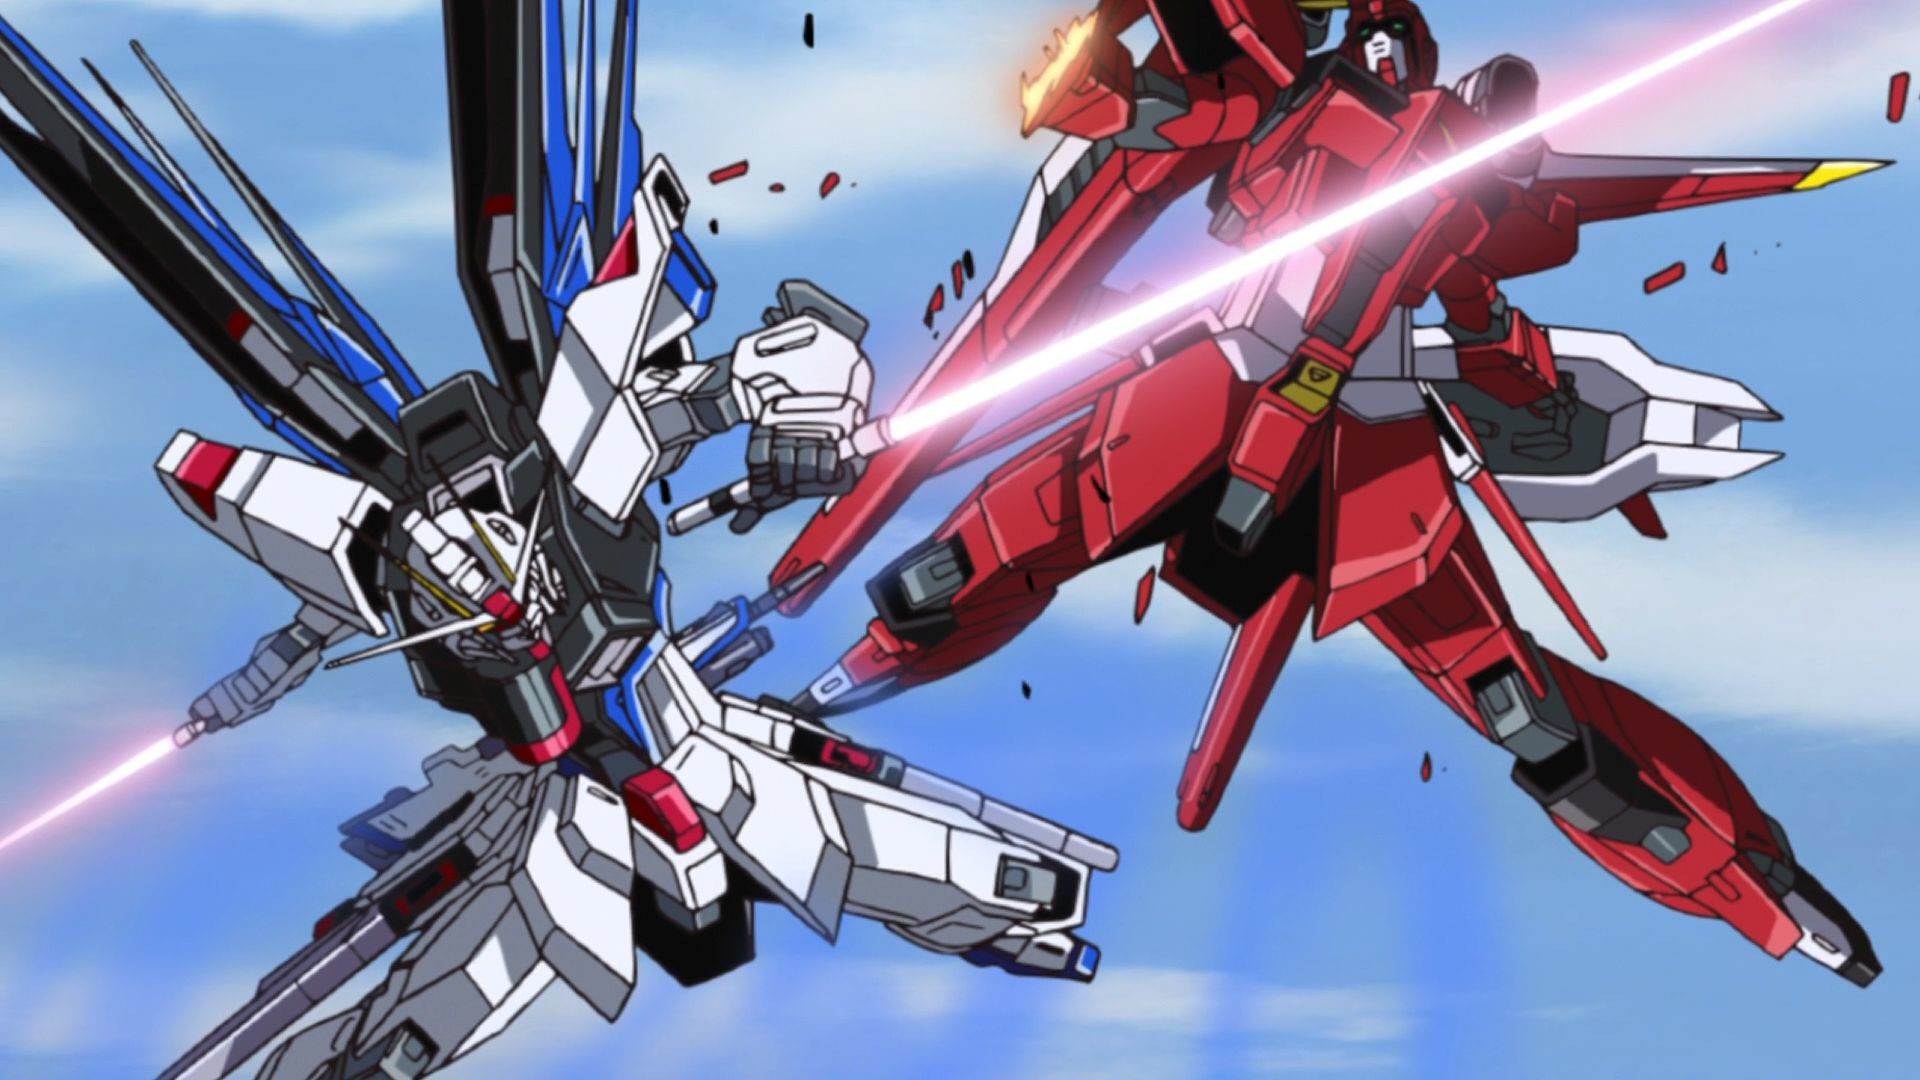 1920x1080 This was another great moment - Athrun getting beat by Kira.